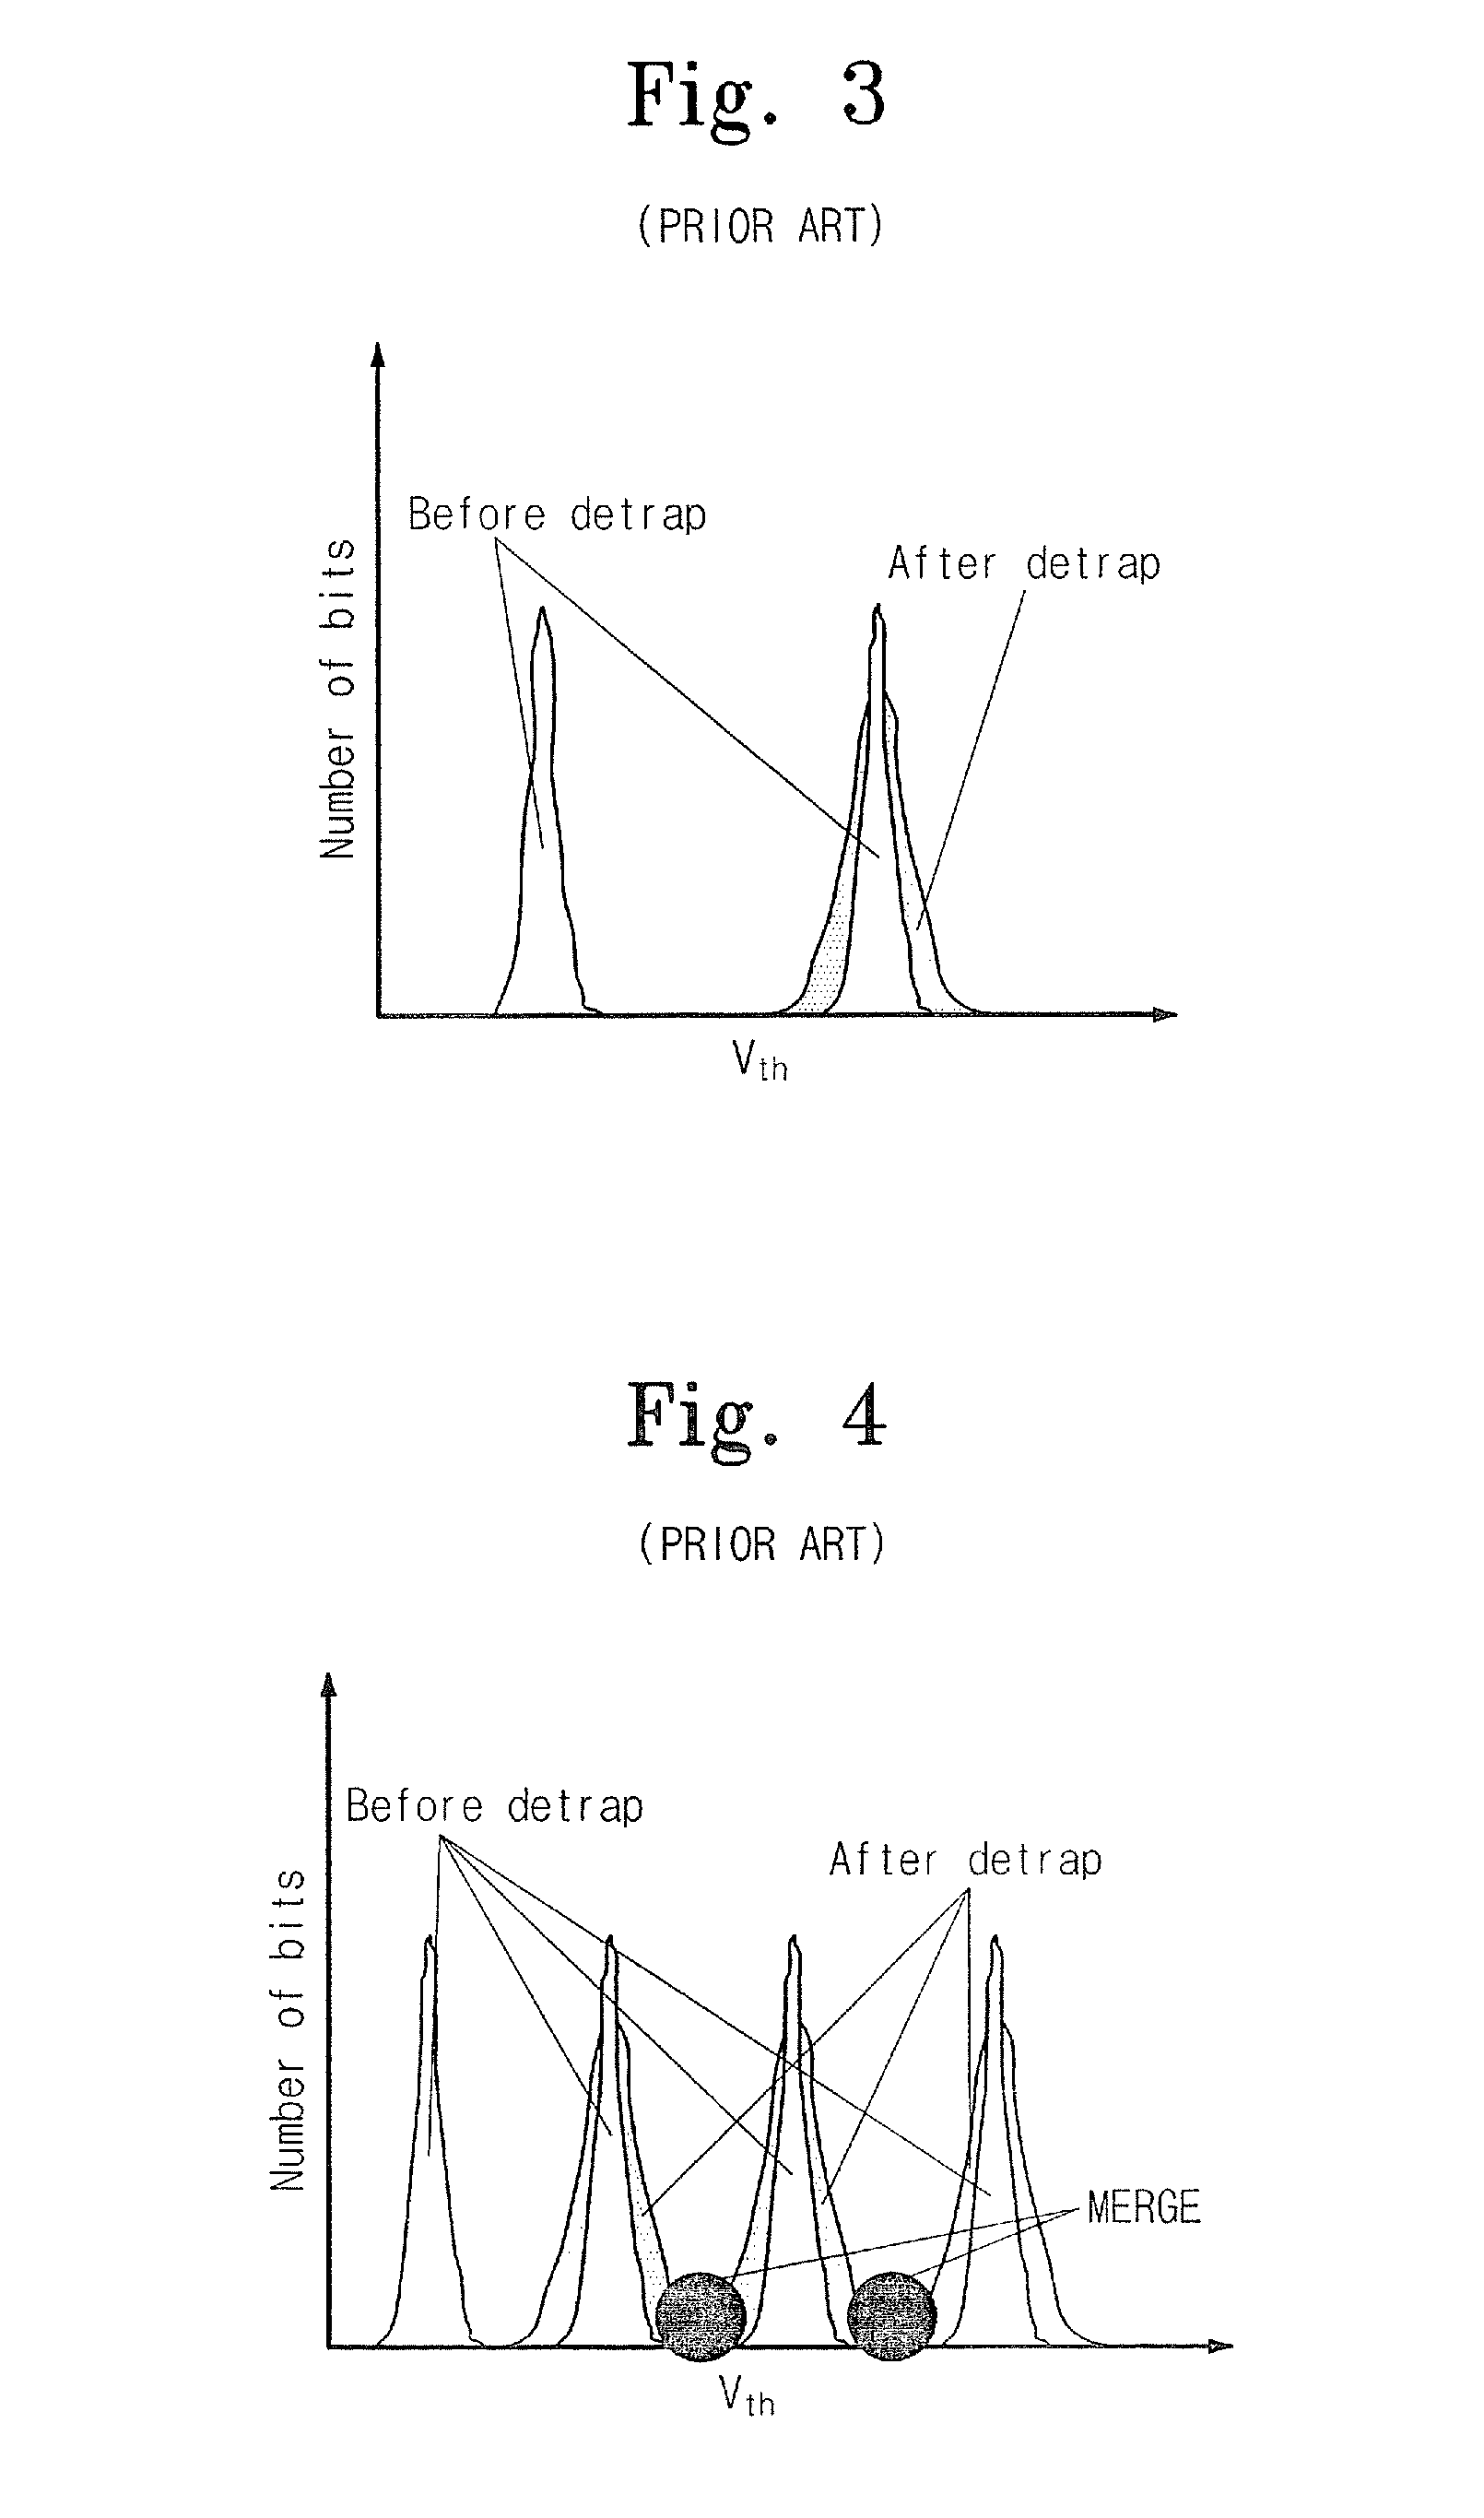 Flash memory devices that utilize age-based verify voltages to increase data reliability and methods of operating same